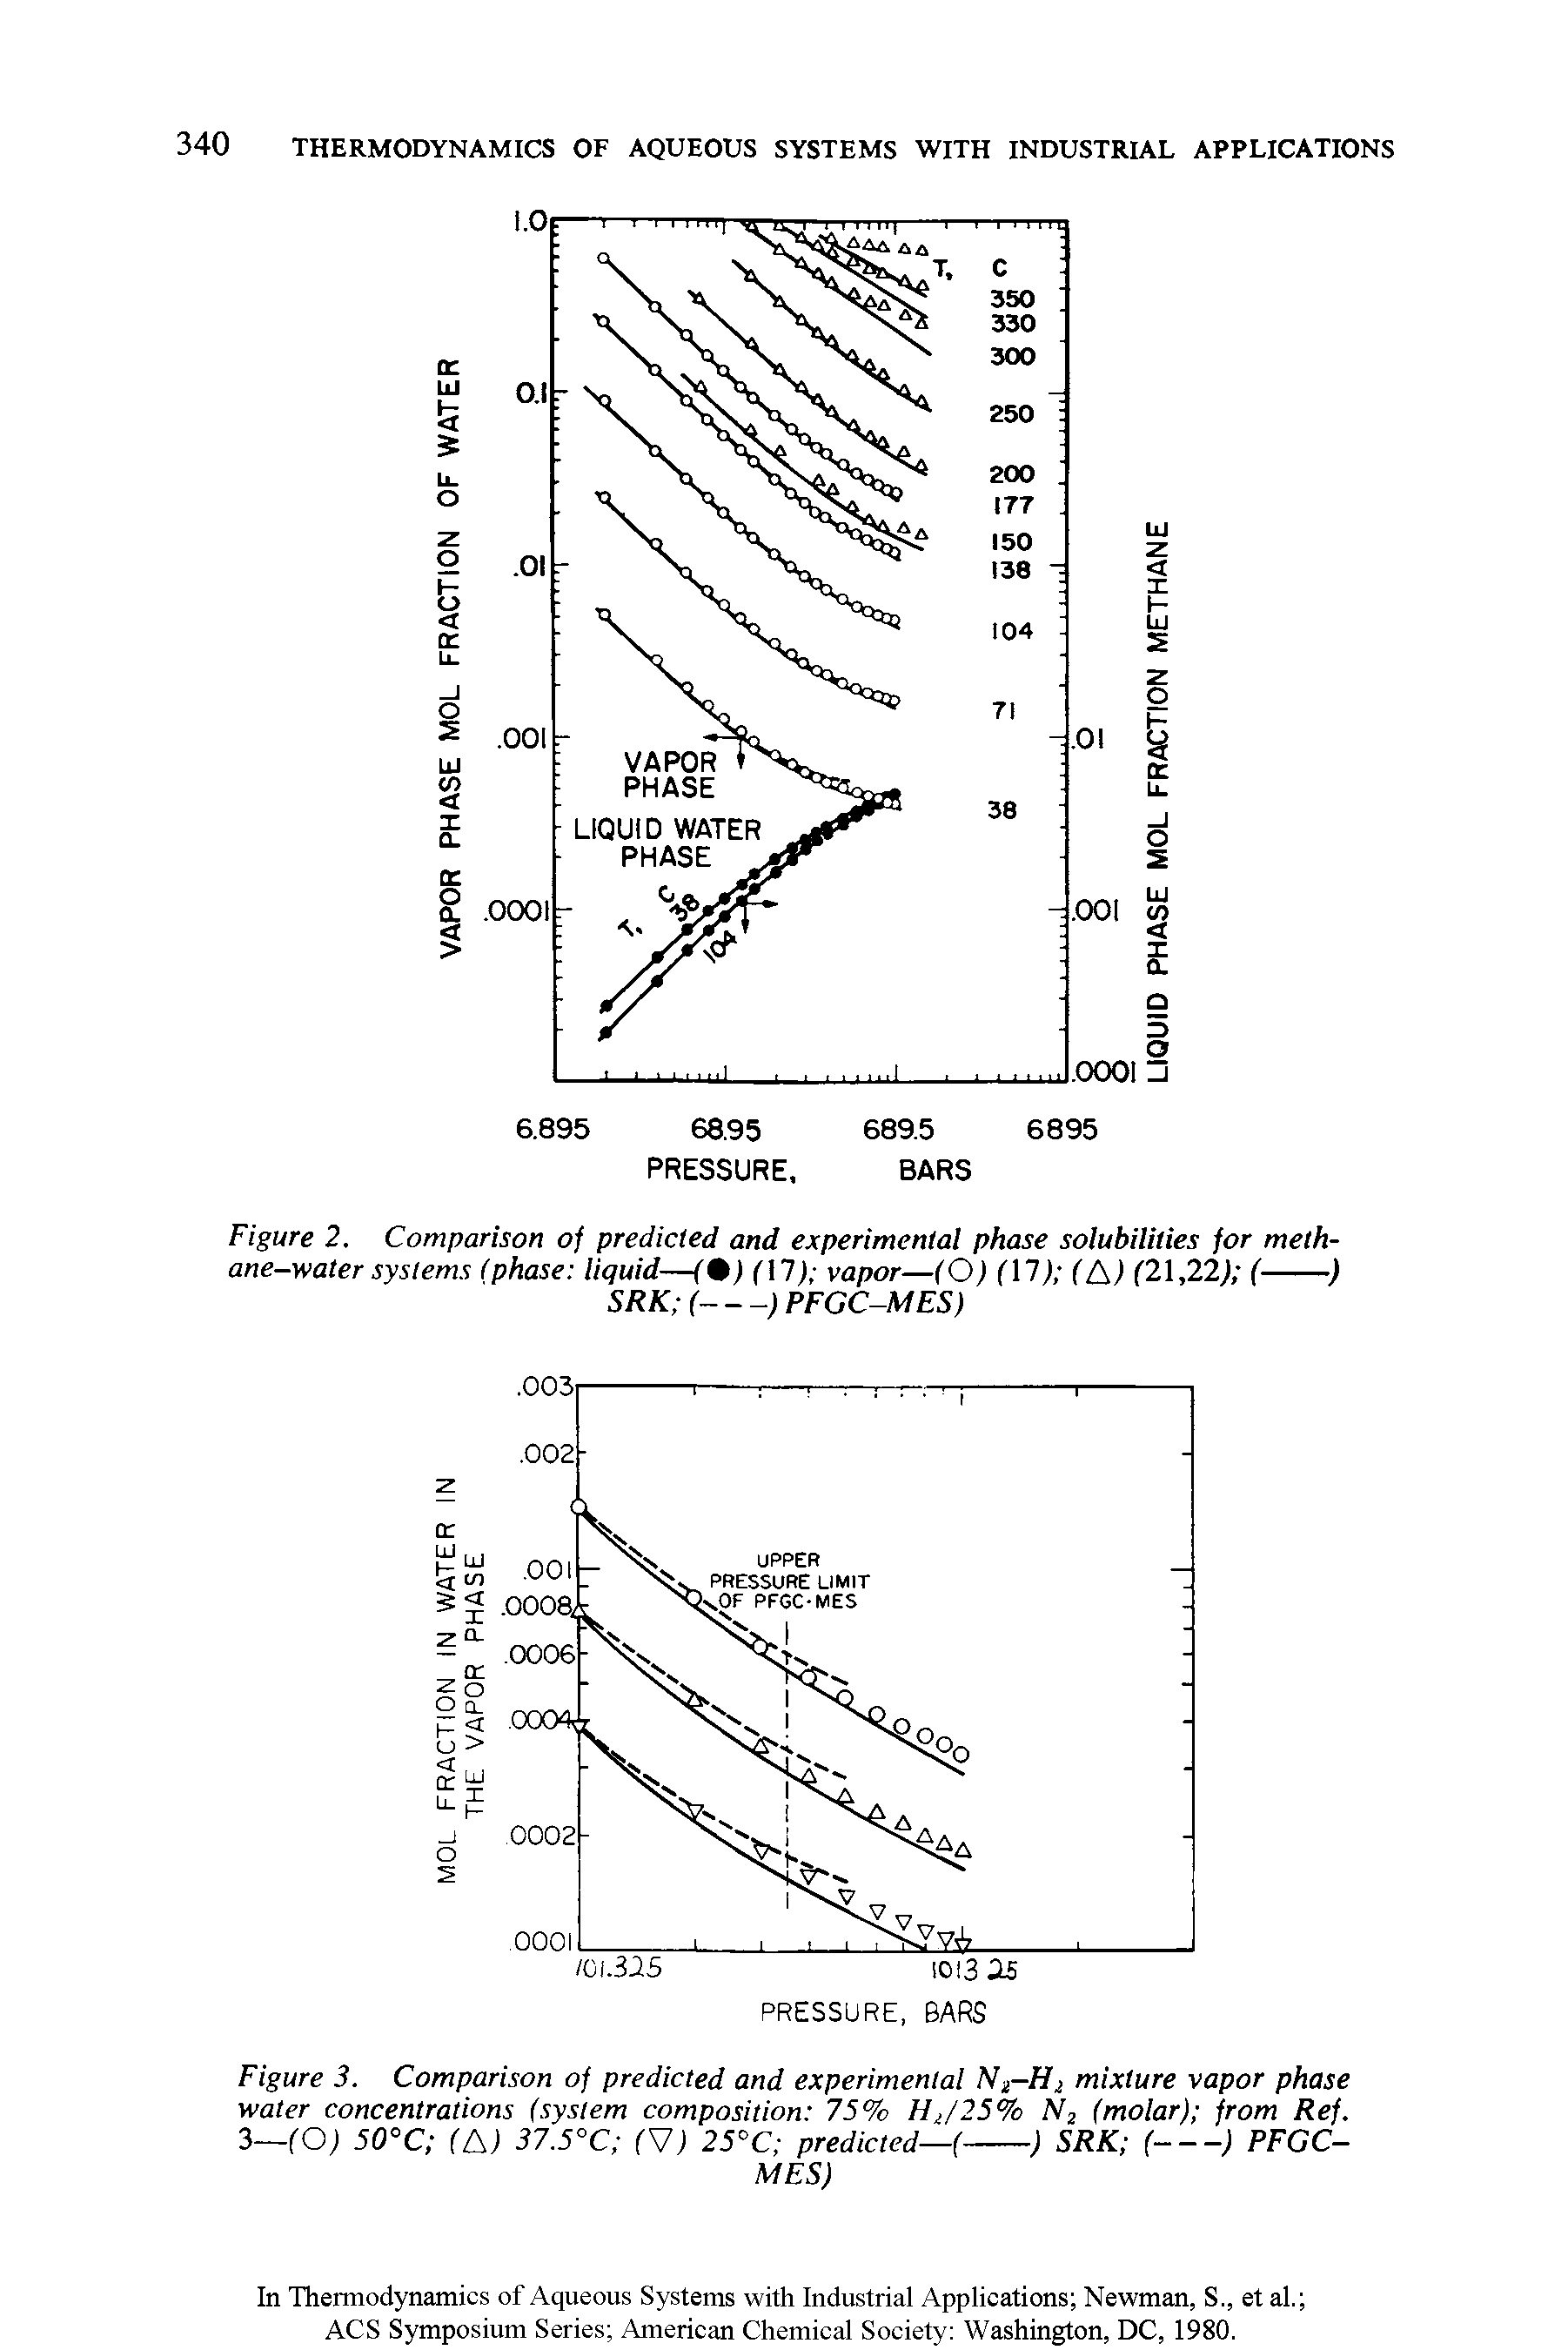 Figure 3. Comparison of predicted and experimental N2-H2 mixture vapor phase water concentrations (system composition 75% HJ25% N2 (molar) from Ref. 3—(O) 50°C (A) 37.5°C (V) 25°C predicted—(-------------) SRK (-------) PFGC-...